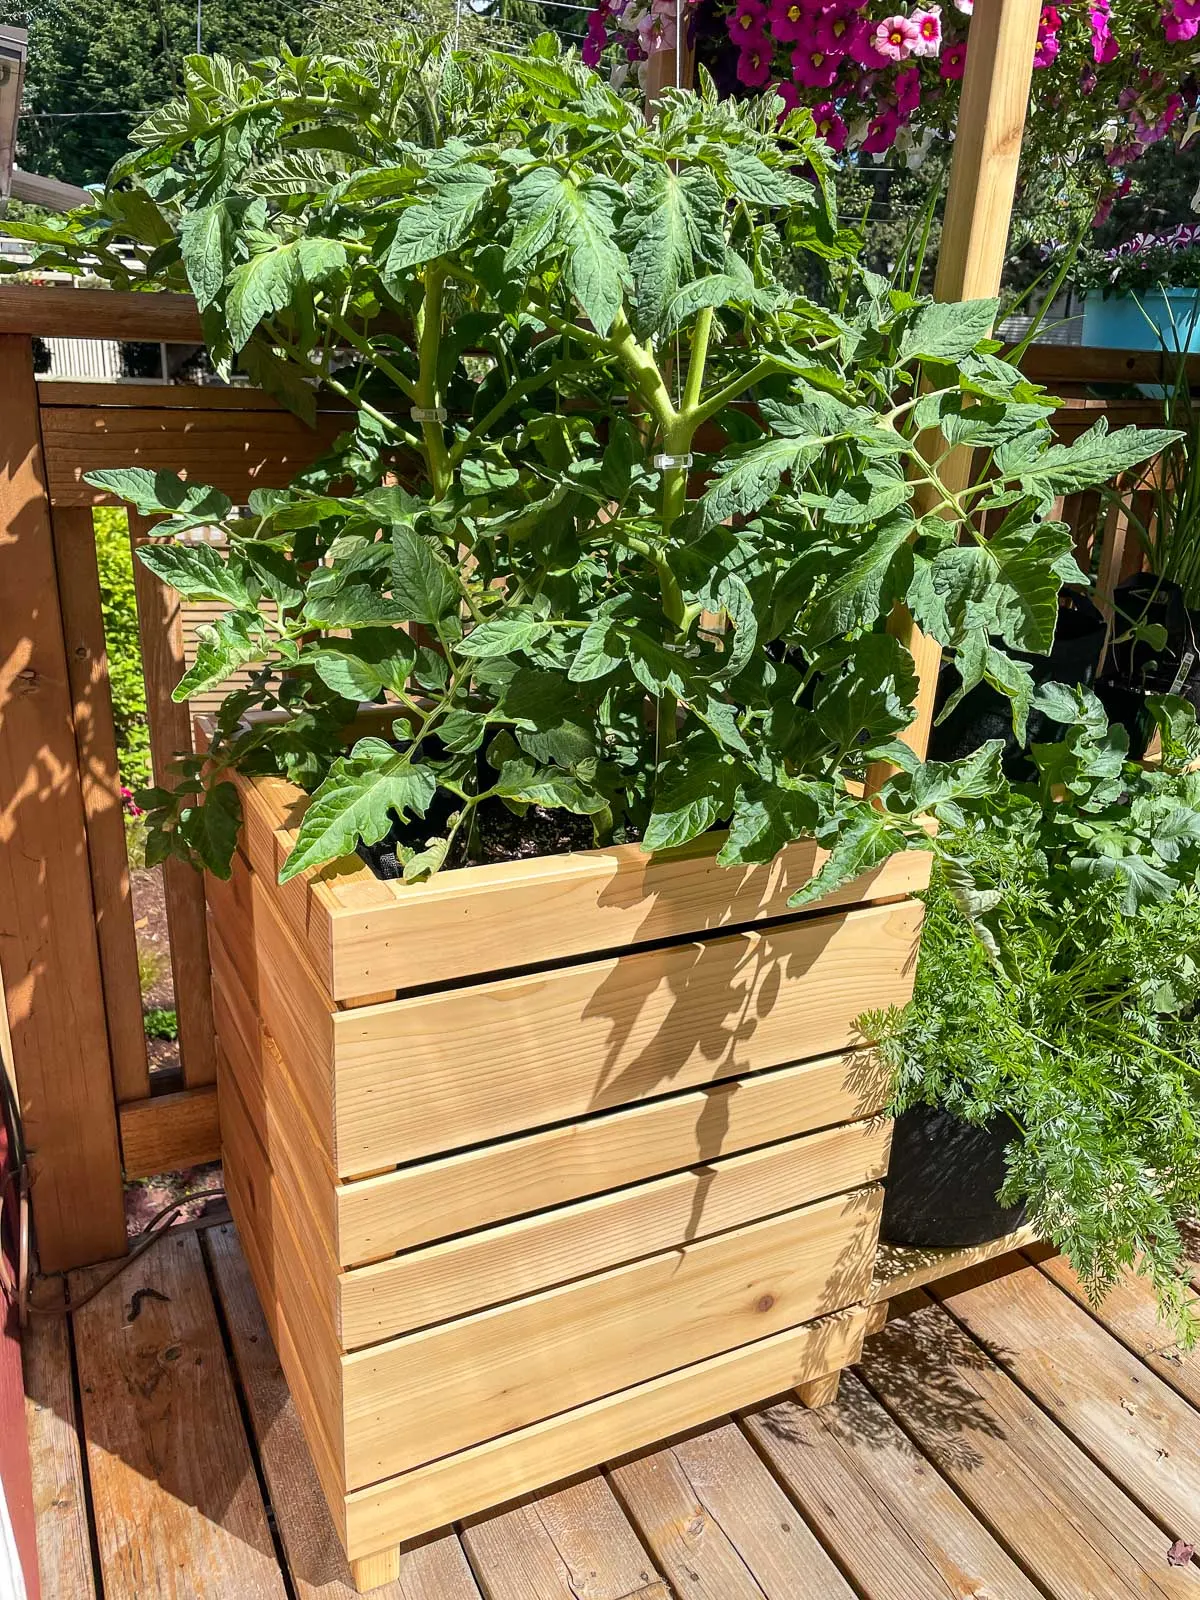 crowded tomato plants in a single grow bag